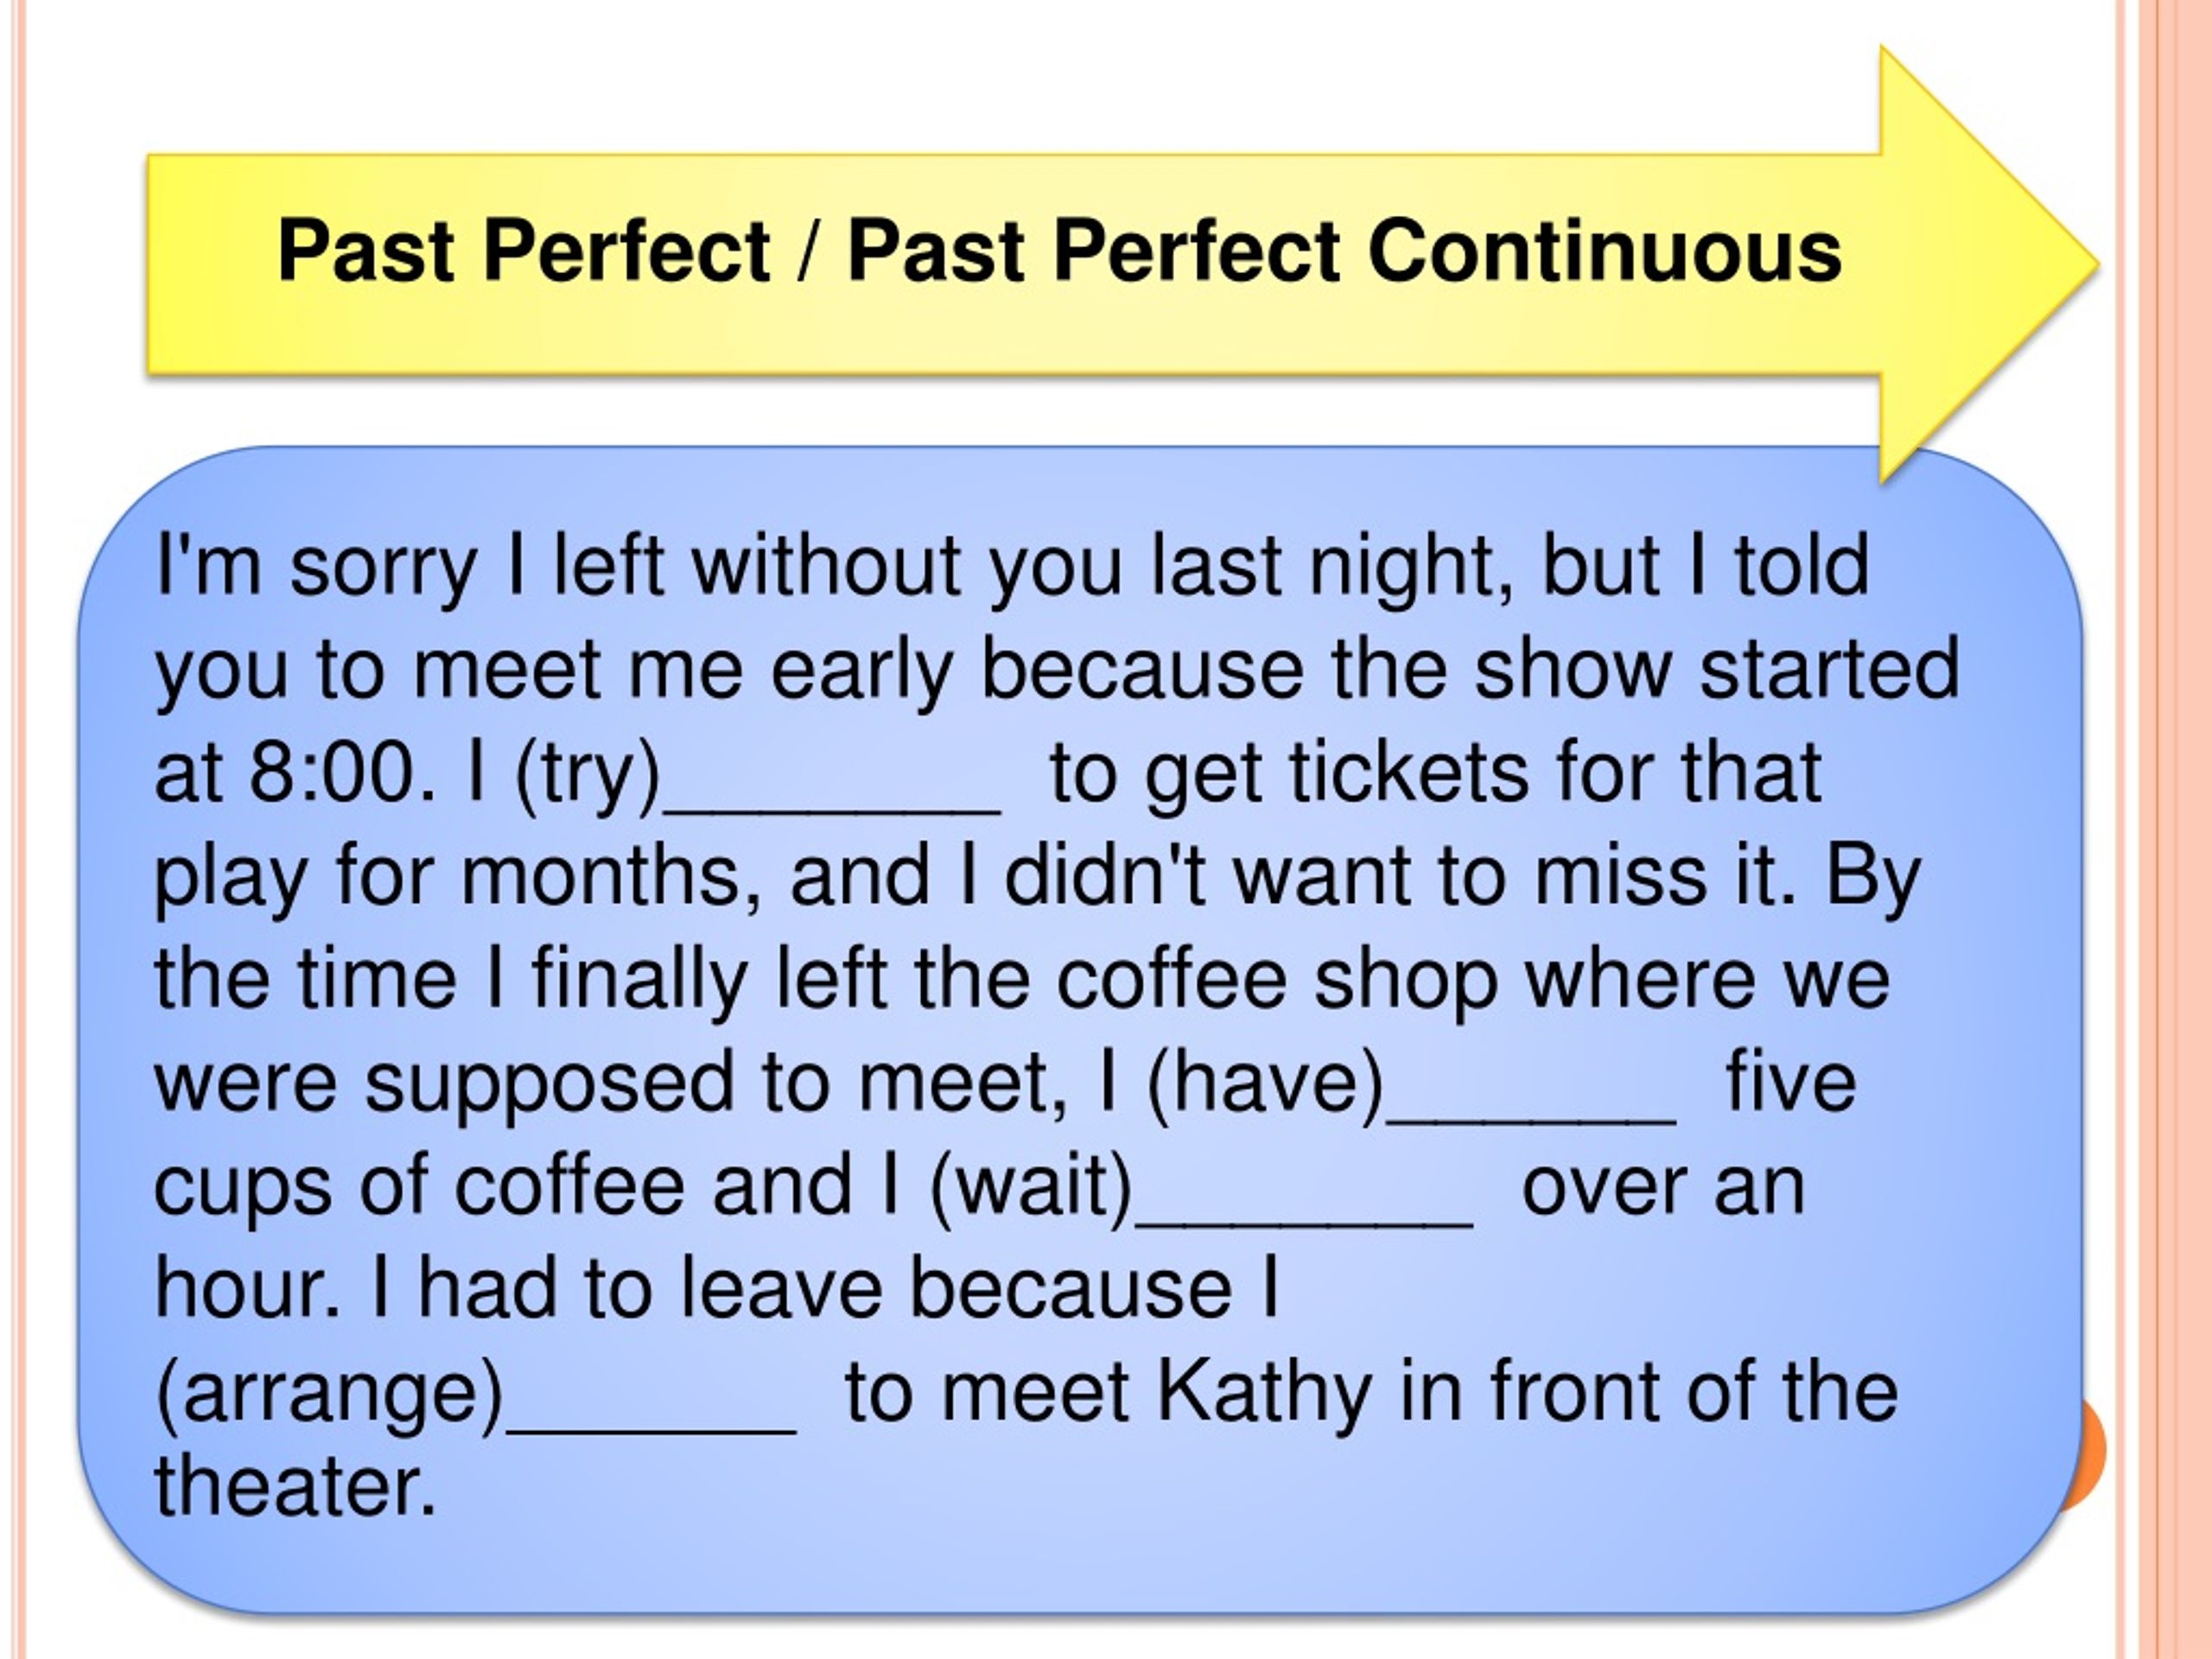 Past perfect тест 7 класс. Past perfect past perfect Continuous упражнения 8 класс. Past perfect past perfect Continuous упражнения. Past perfect Continuous упражнения. Past perfect упражнения.